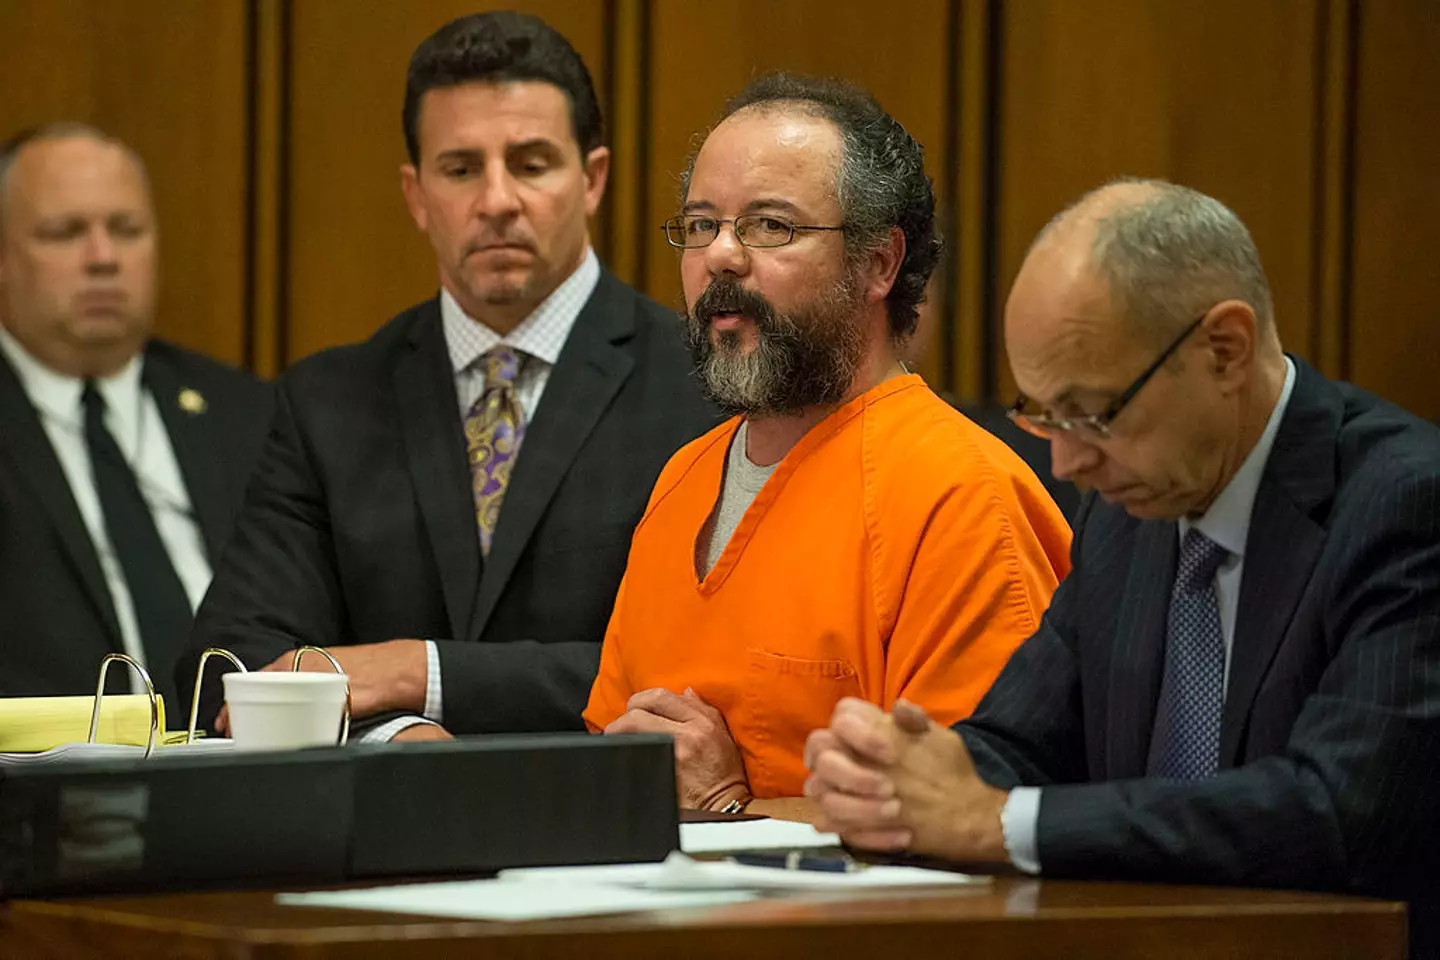 The suburban home belonged to Ariel Castro, who abducted three women and held them captive for over a decade (Angelo Merendino/Getty Images)